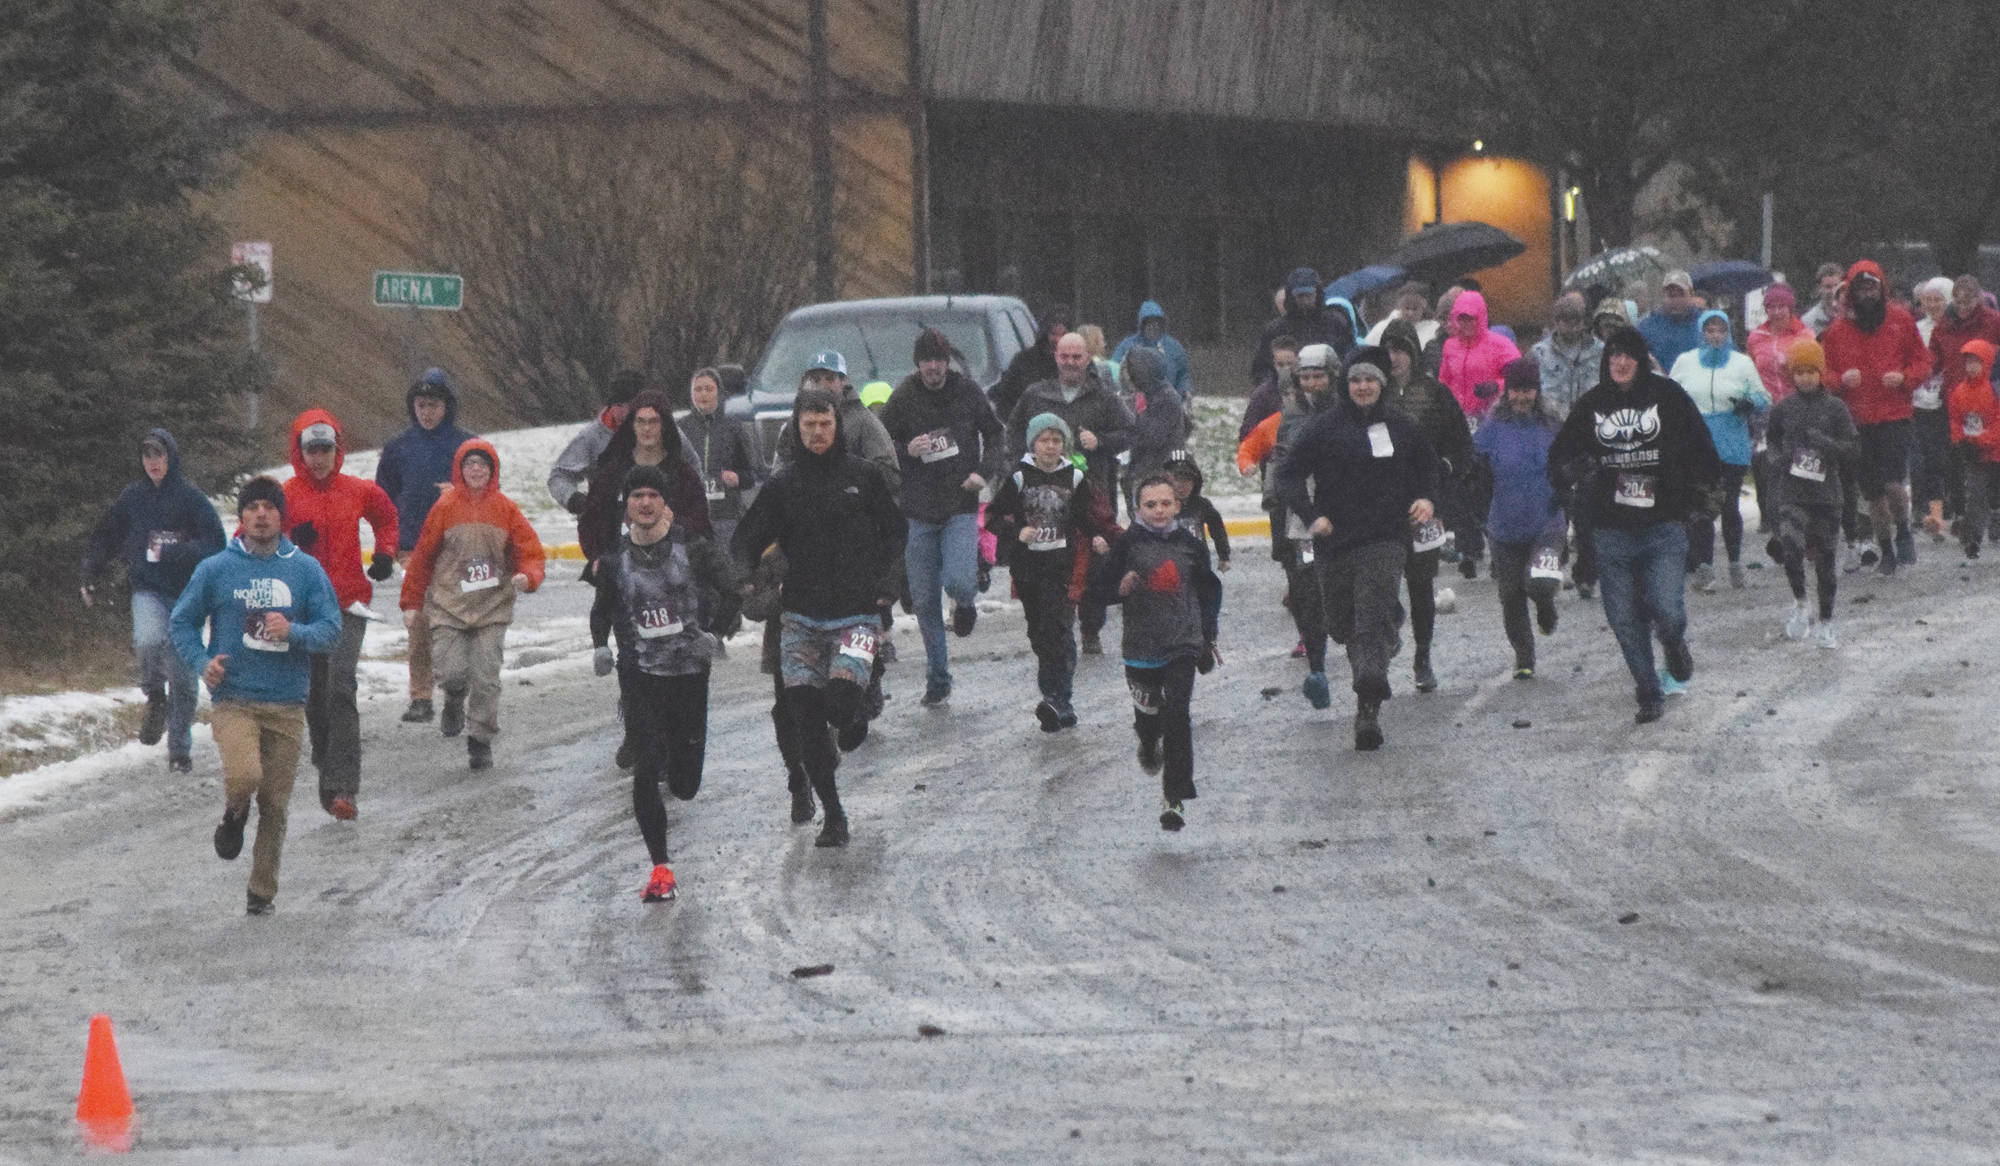 The field of runners take off Thursday, Nov. 28, 2019, at the Turkey Trot in Soldotna, Alaska. (Photo by Joey Klecka/Peninsula Clarion)